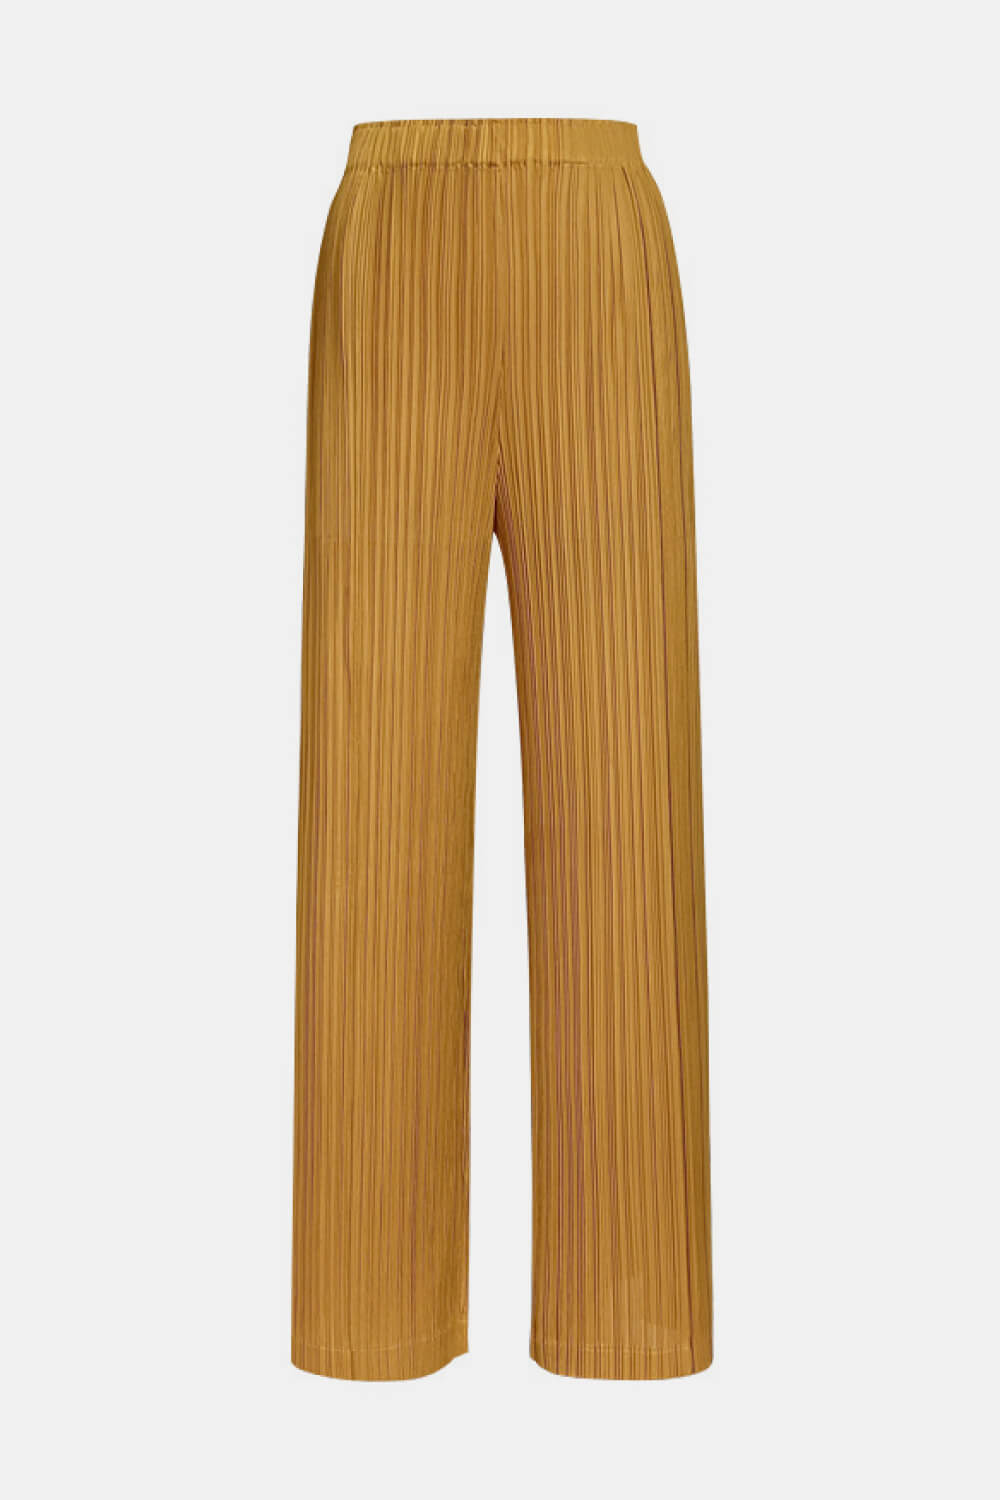 Post- The Modhemian How to Wear Hight Waisted Pleated Pants, and